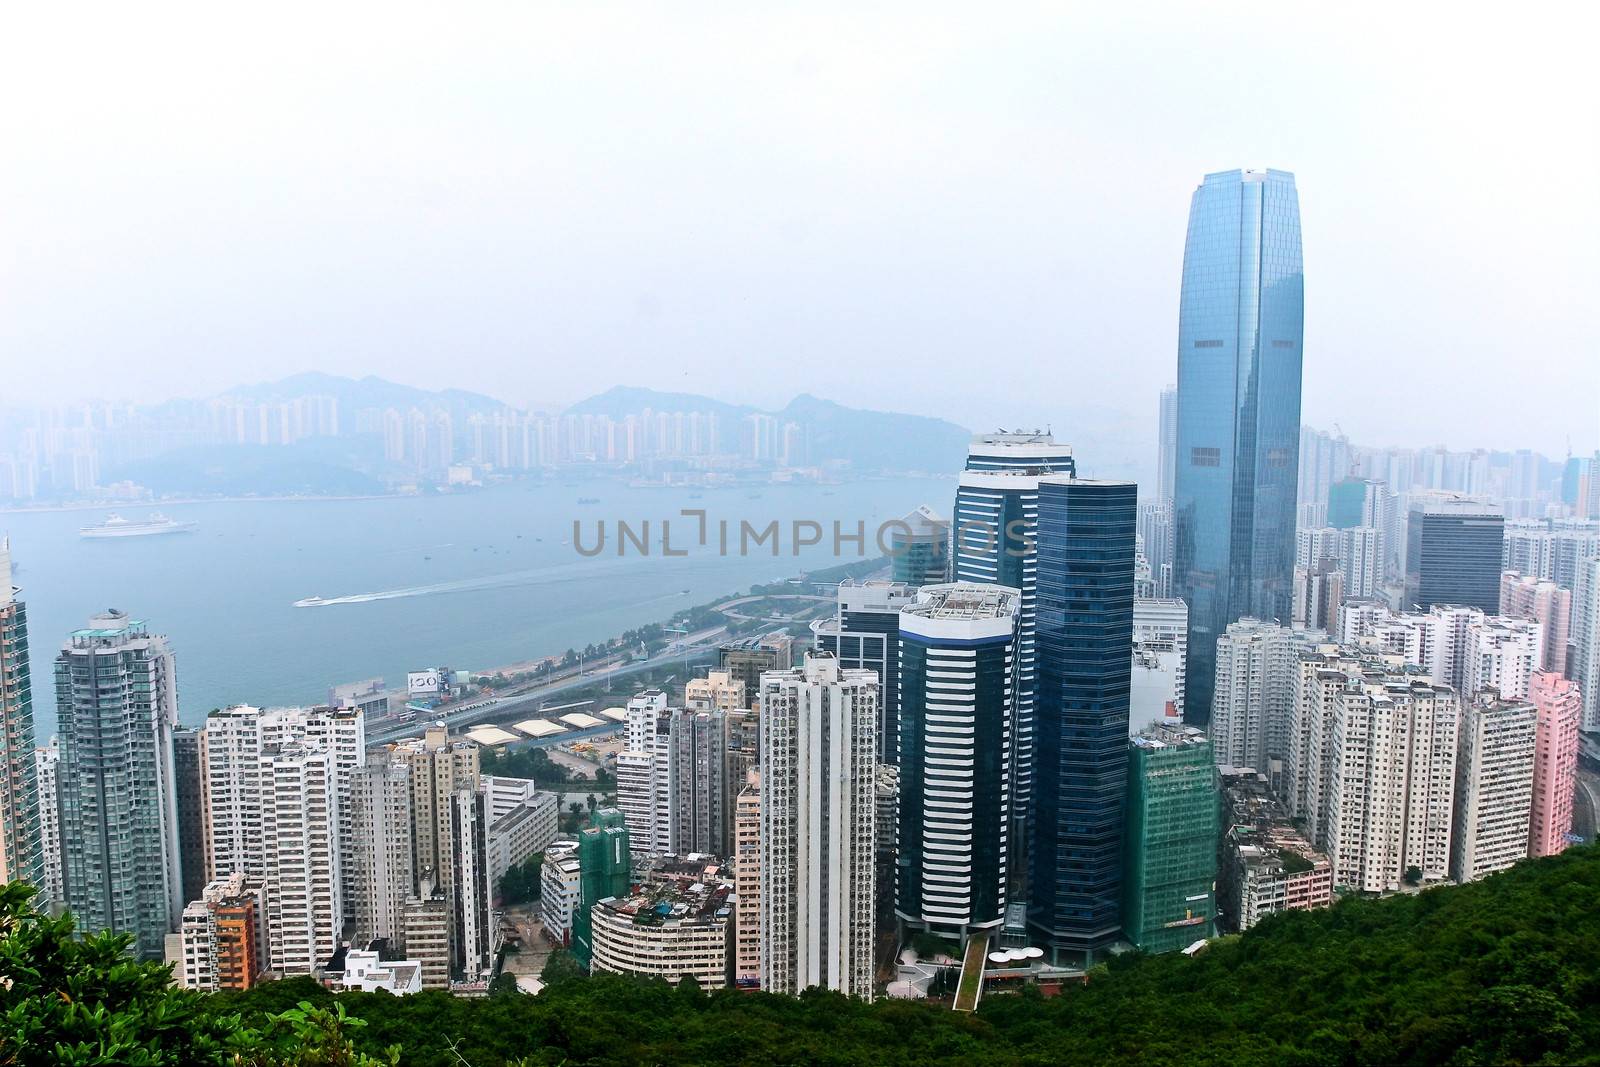 City view in Hong Kong by yayalineage